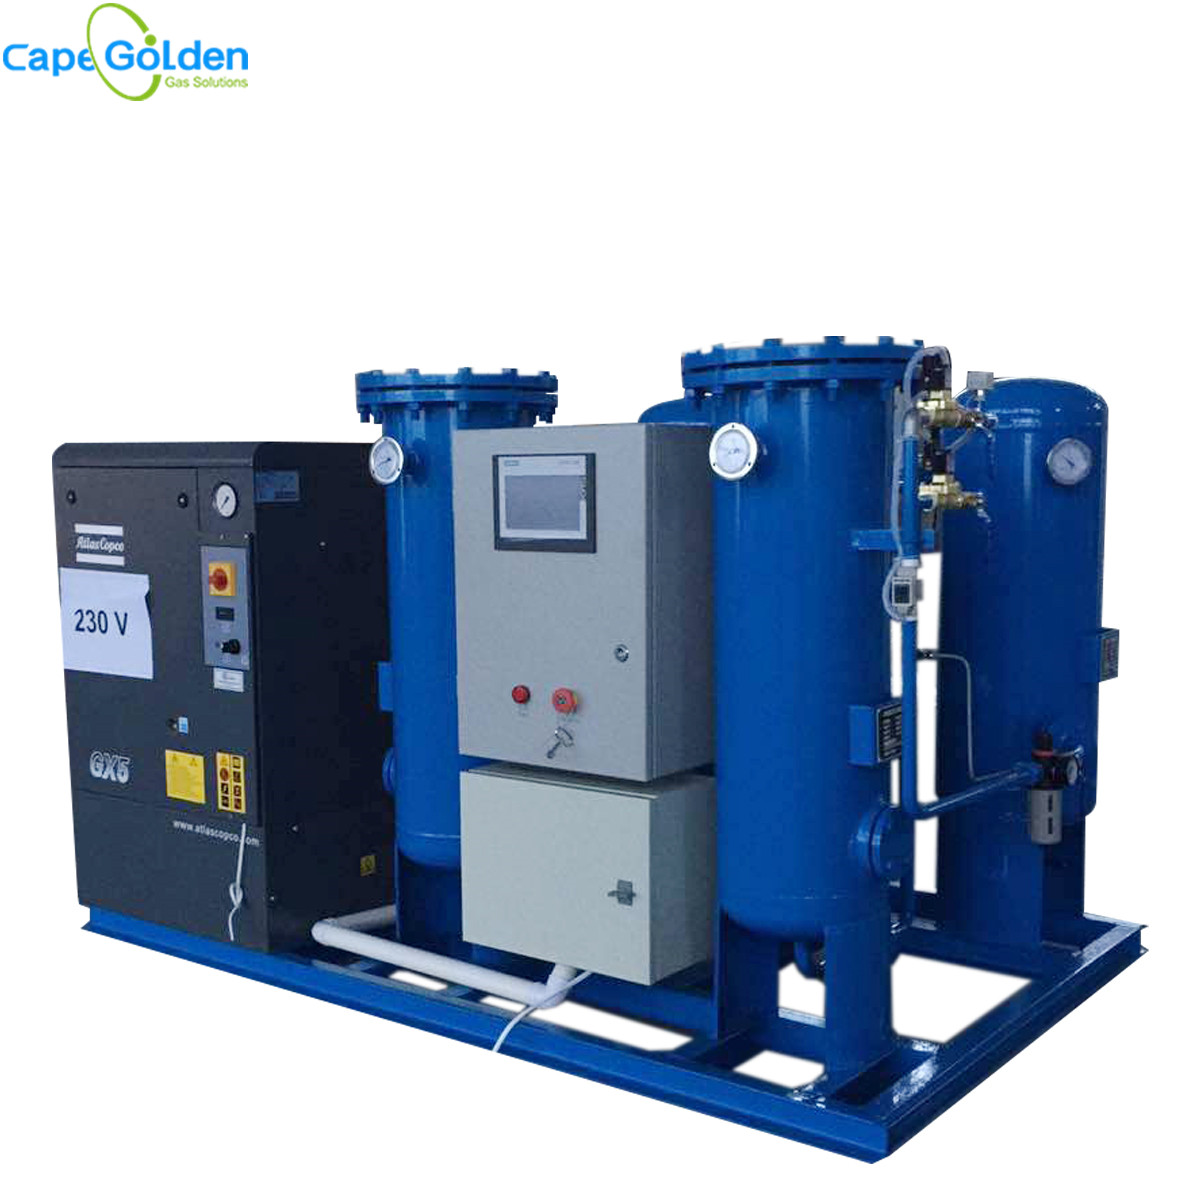 Good Quality Oxygen Generator -
 Integrated oxygen generator for filling cylinders – Cape Golden